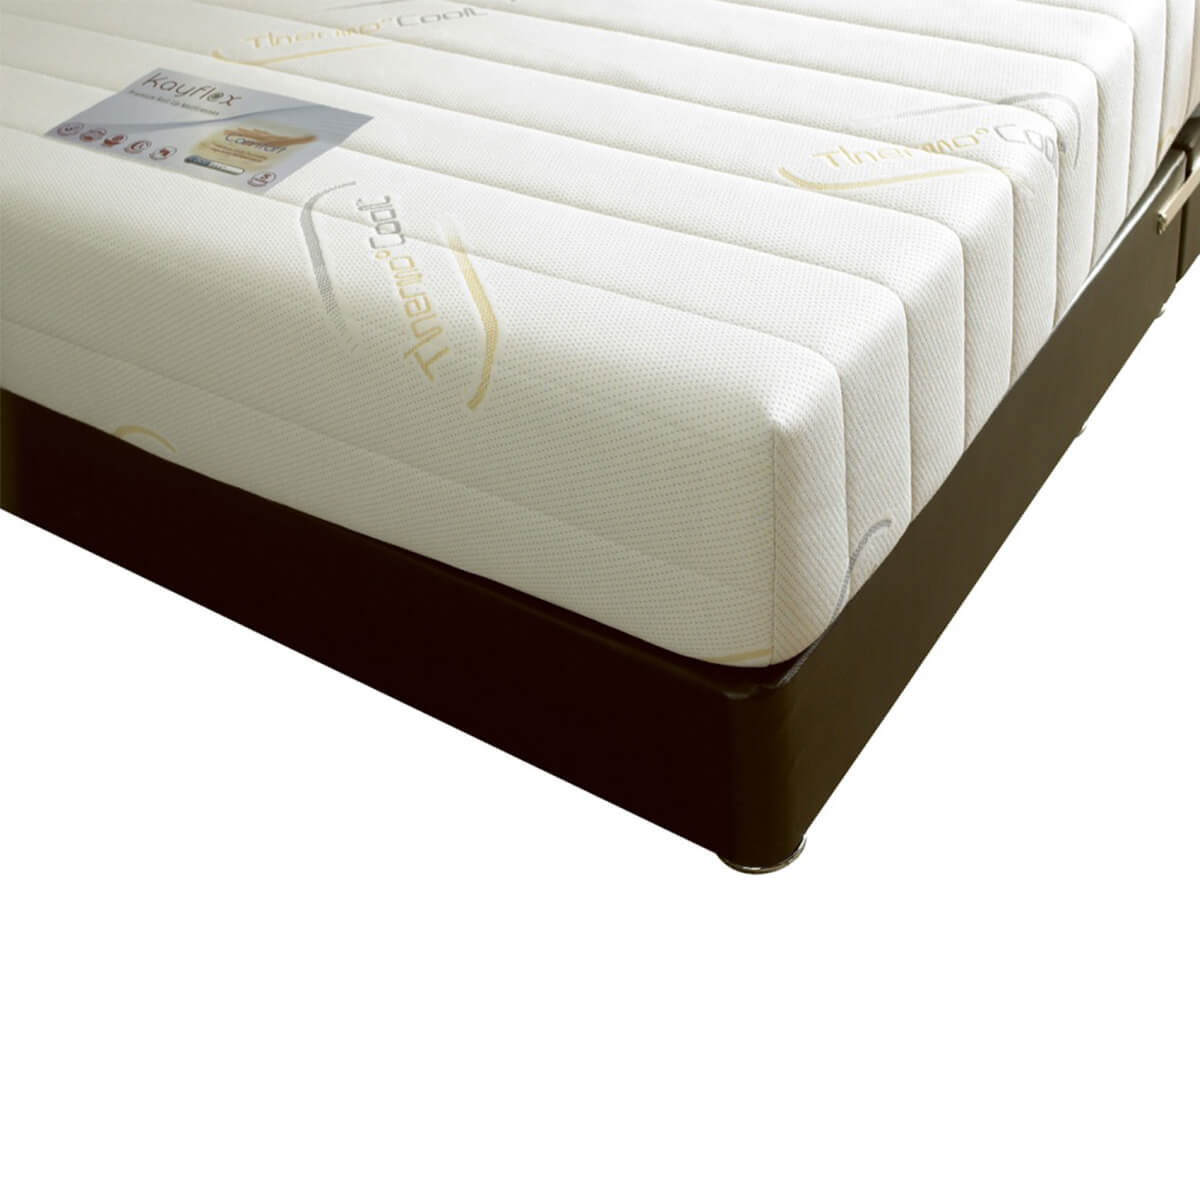 MEMORY FOAM MATTRESS 20CM  DEEP SOFT/FIRM WITH QUILTED ZIP COVER 